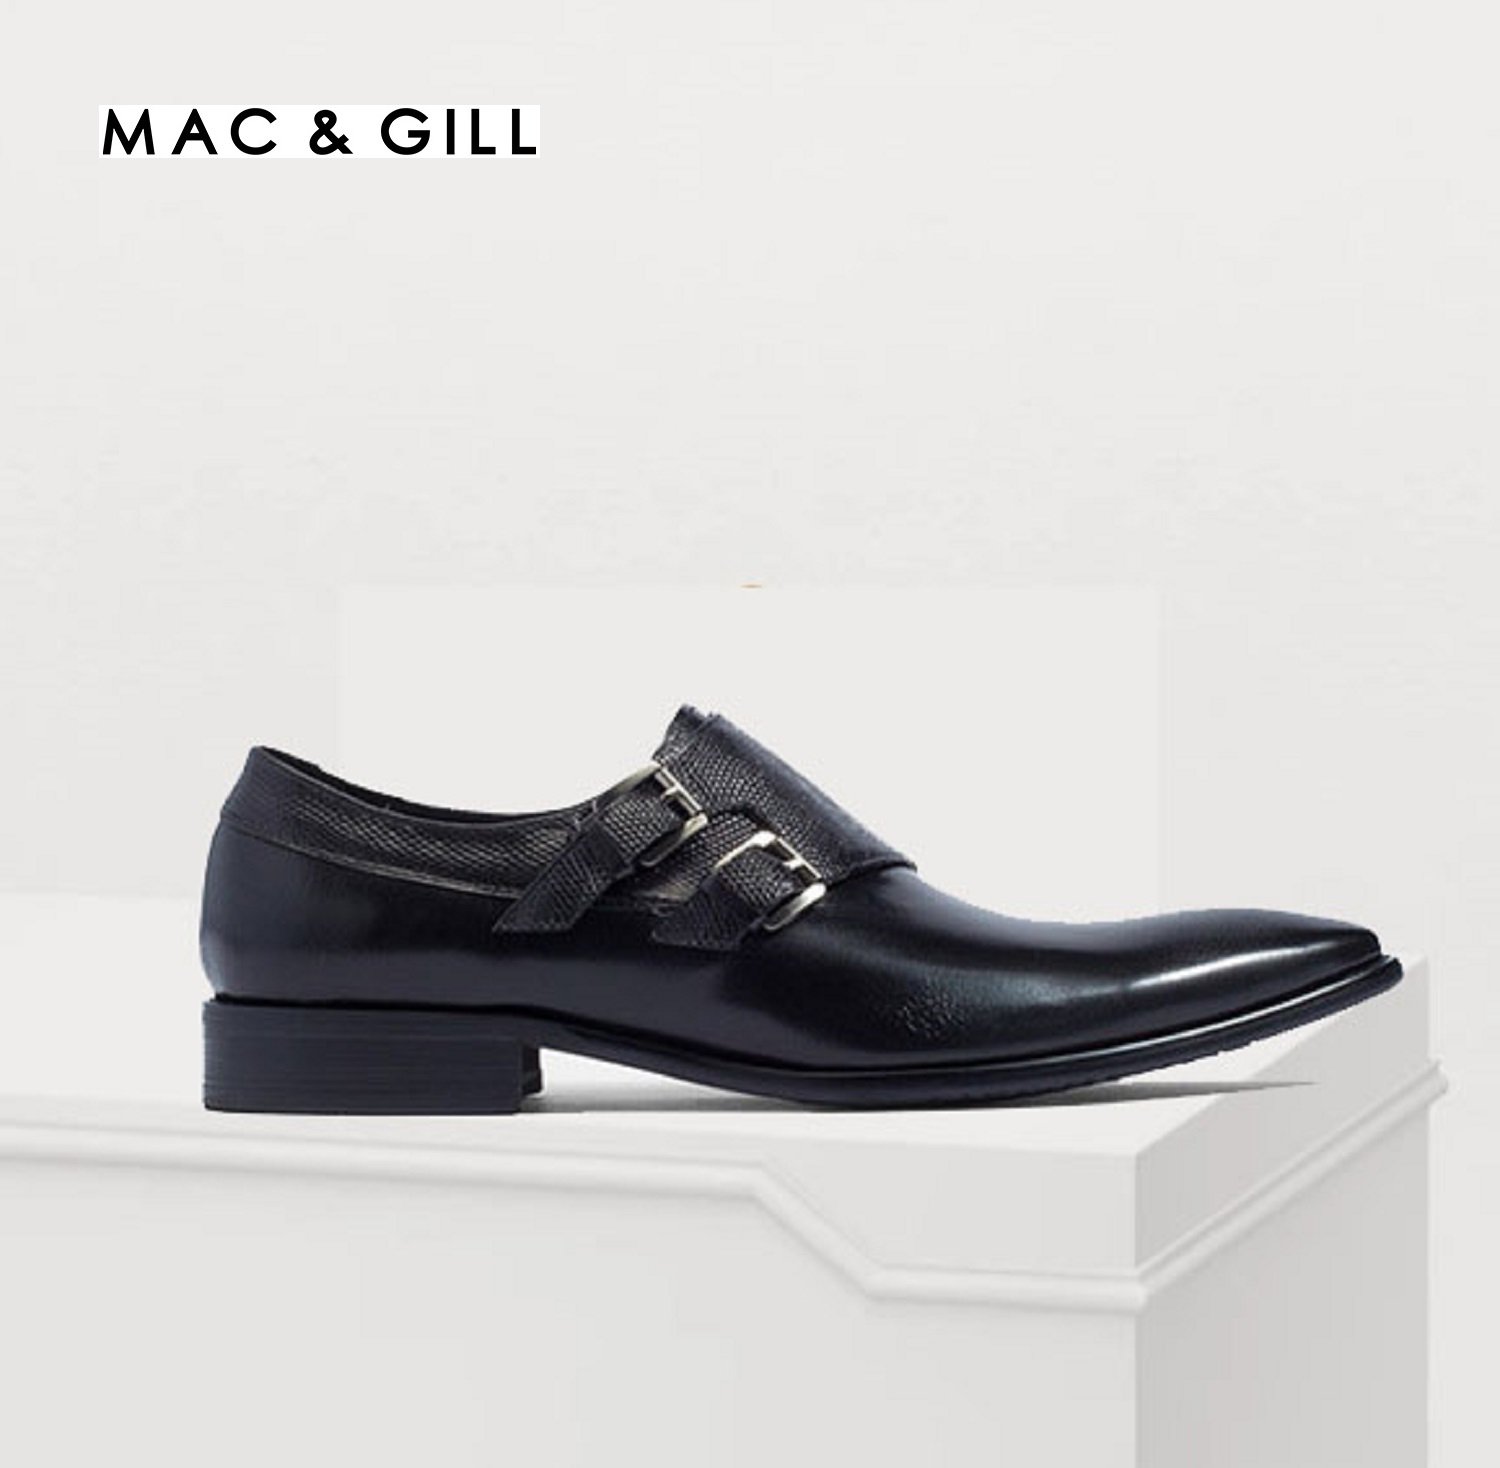 Exotic MONKSTRAP DOUBLE BUCKLE LEATHER SHOES - mac-gill